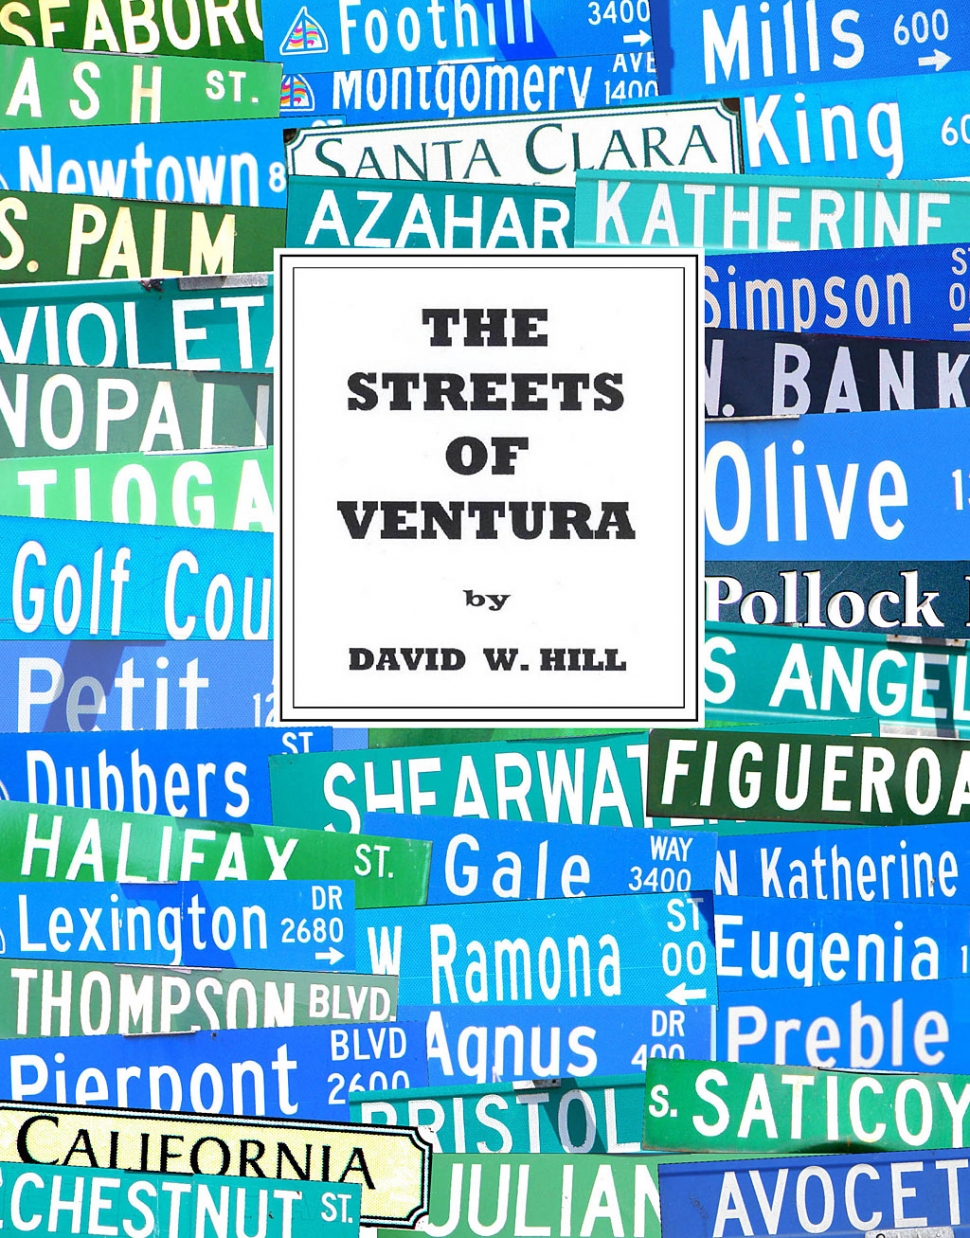 Book: The Streets of Ventura.